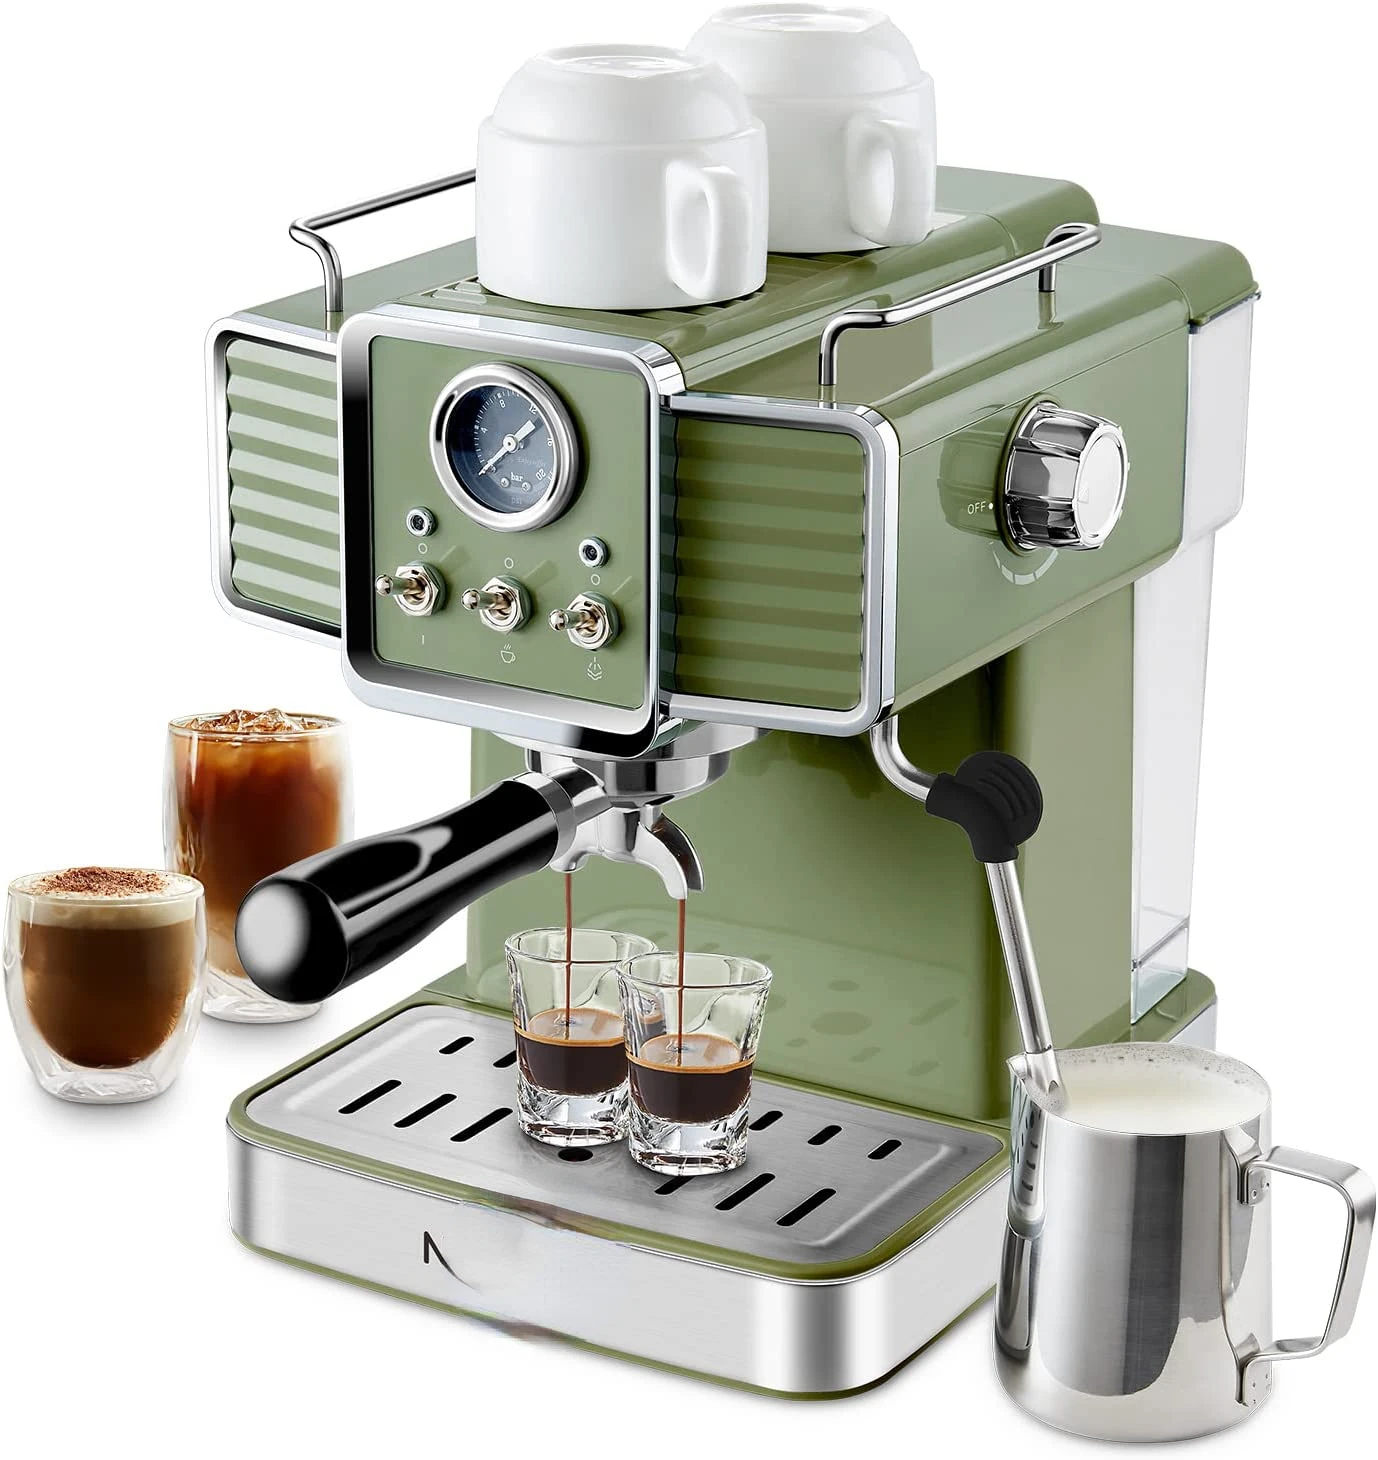 

Coffee Machine 15 Espresso Maker with Milk Frother Steam Wand Cappuccino, Latte for Home Barista, 1.6L Removable Water Tank, Co